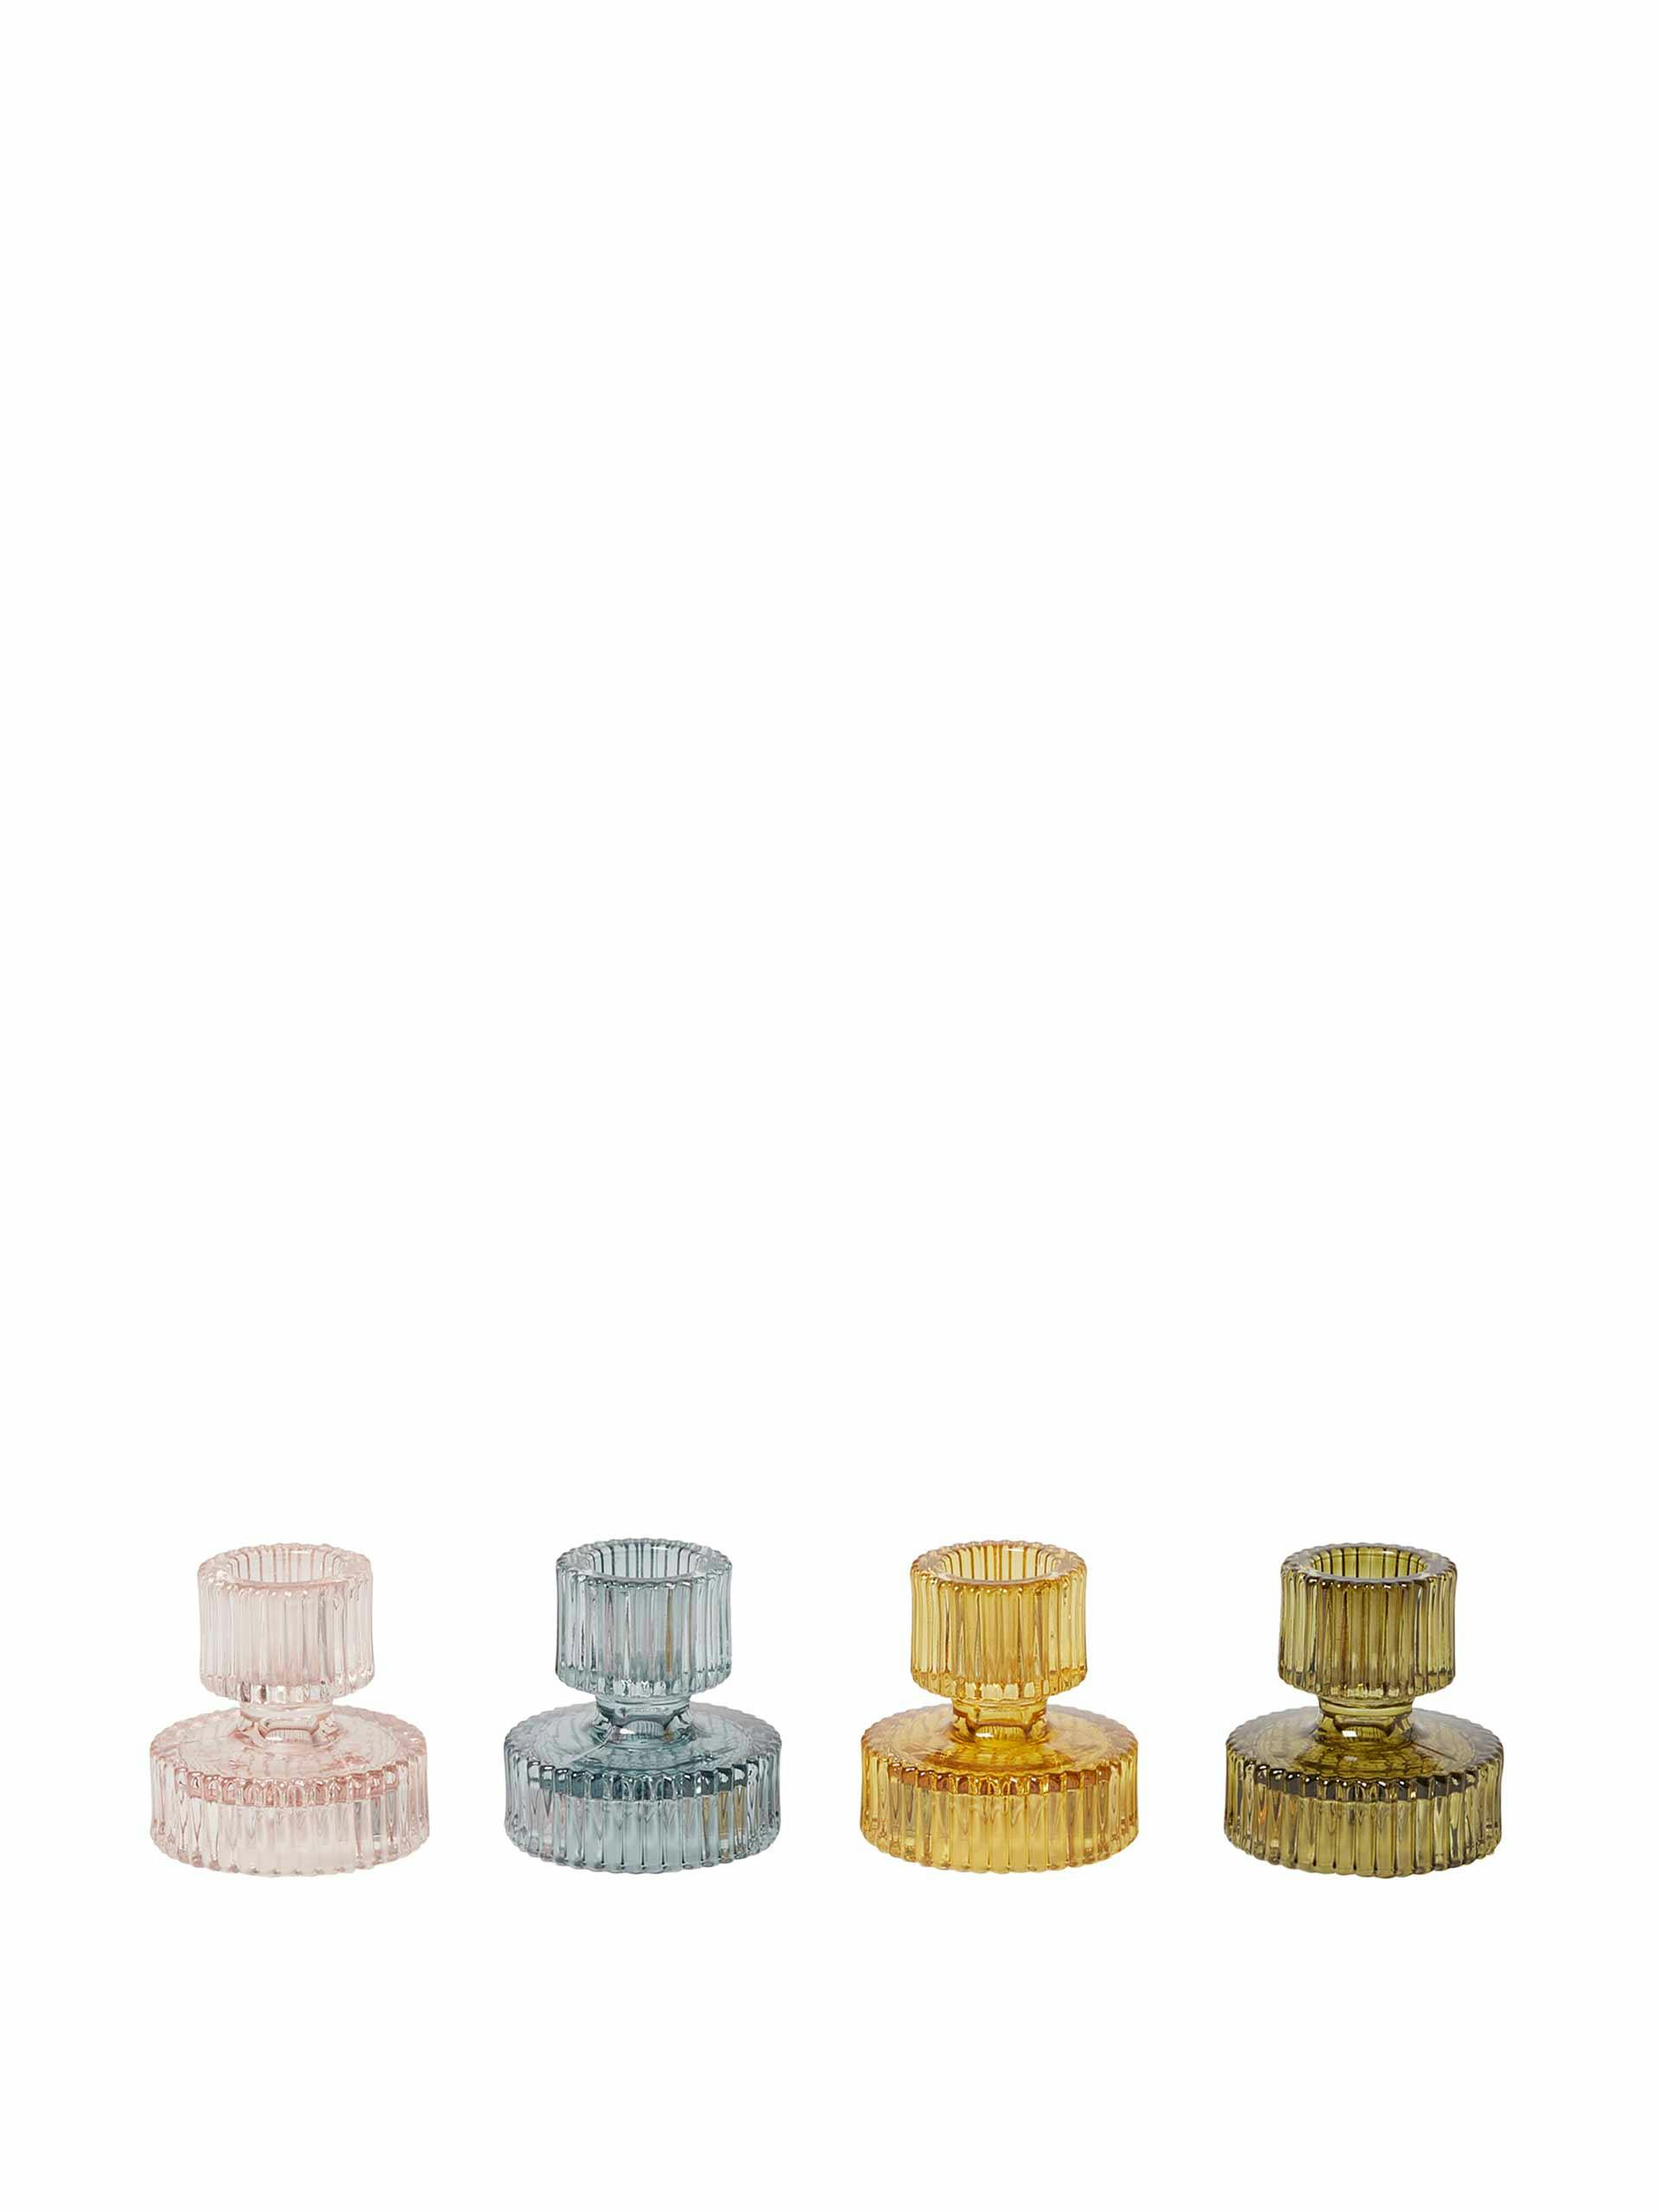 Kyto double sided glass candlestick holders (set of four)